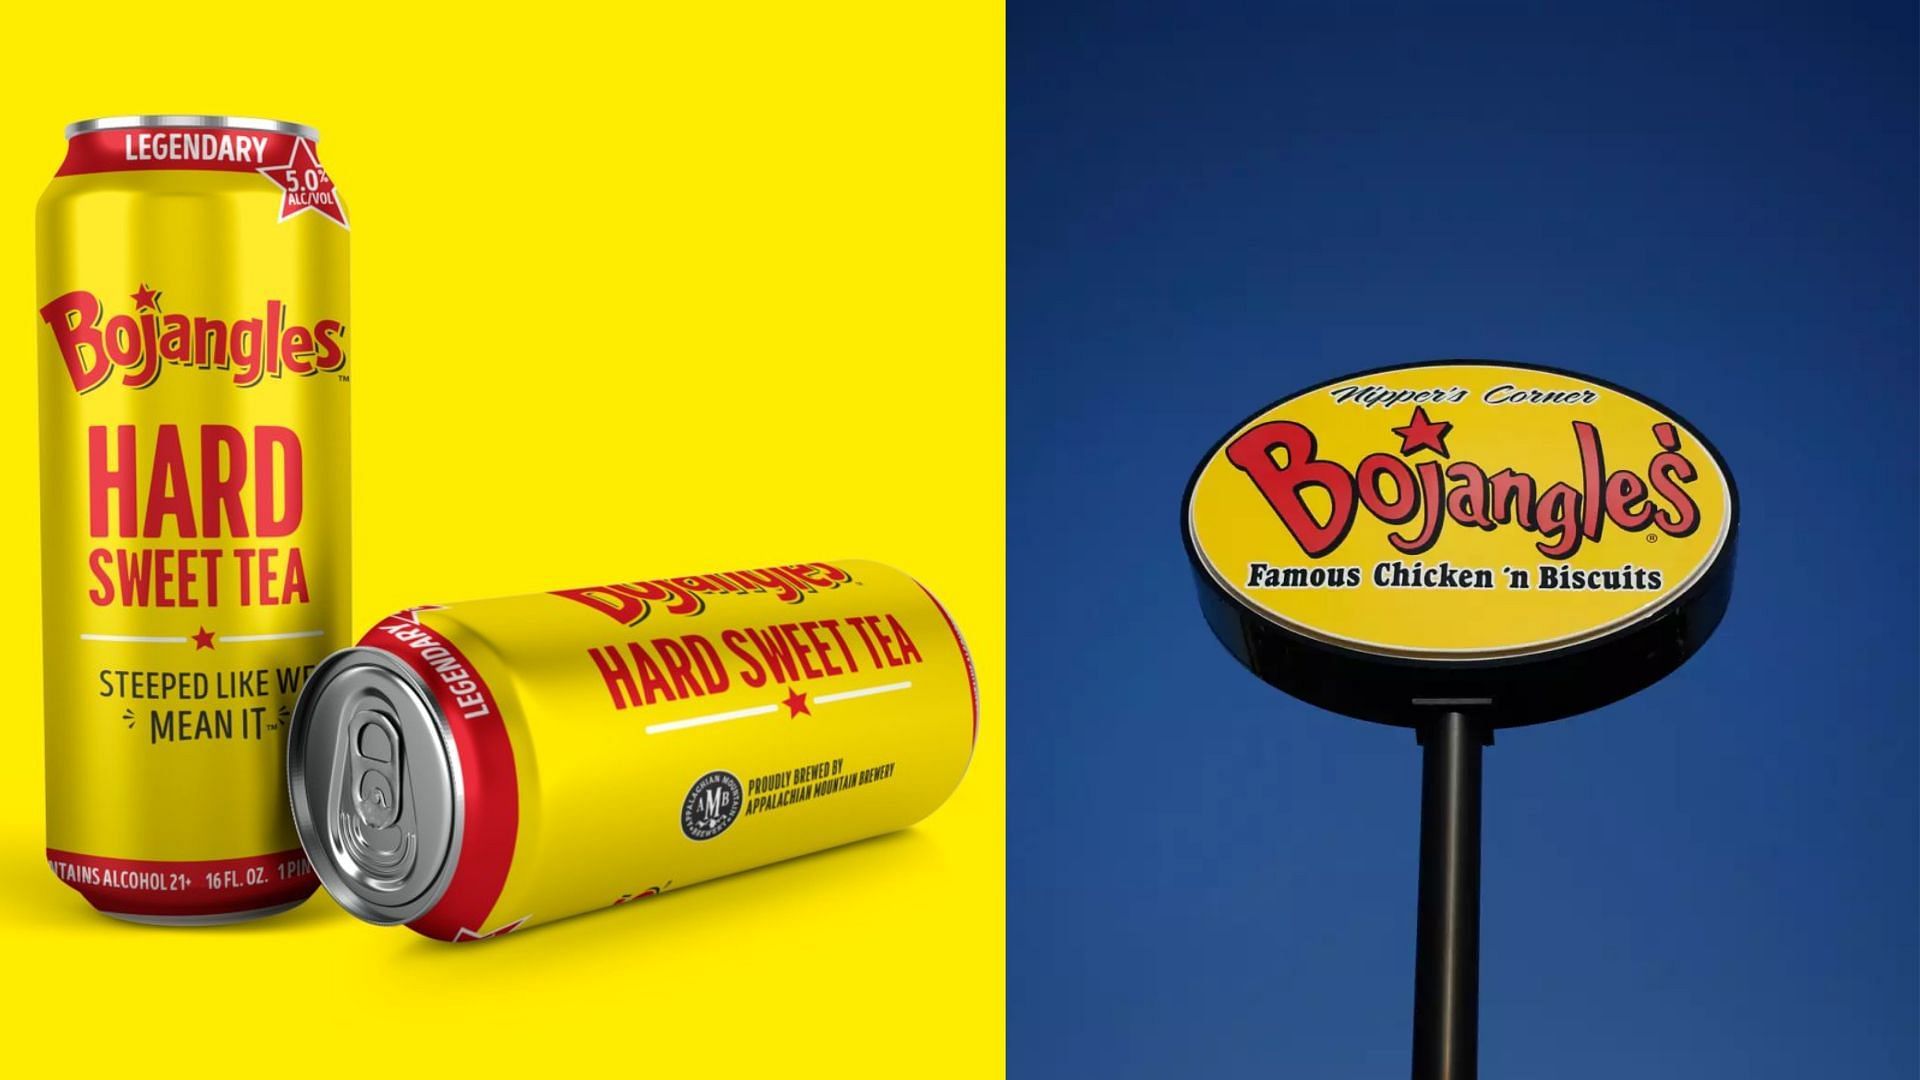 Bojangles announced a partnership with the Applachian Mountain Brewery for the new Hard Sweet Tea (Image via Luke Sharrett/Bloomberg/Getty Images)